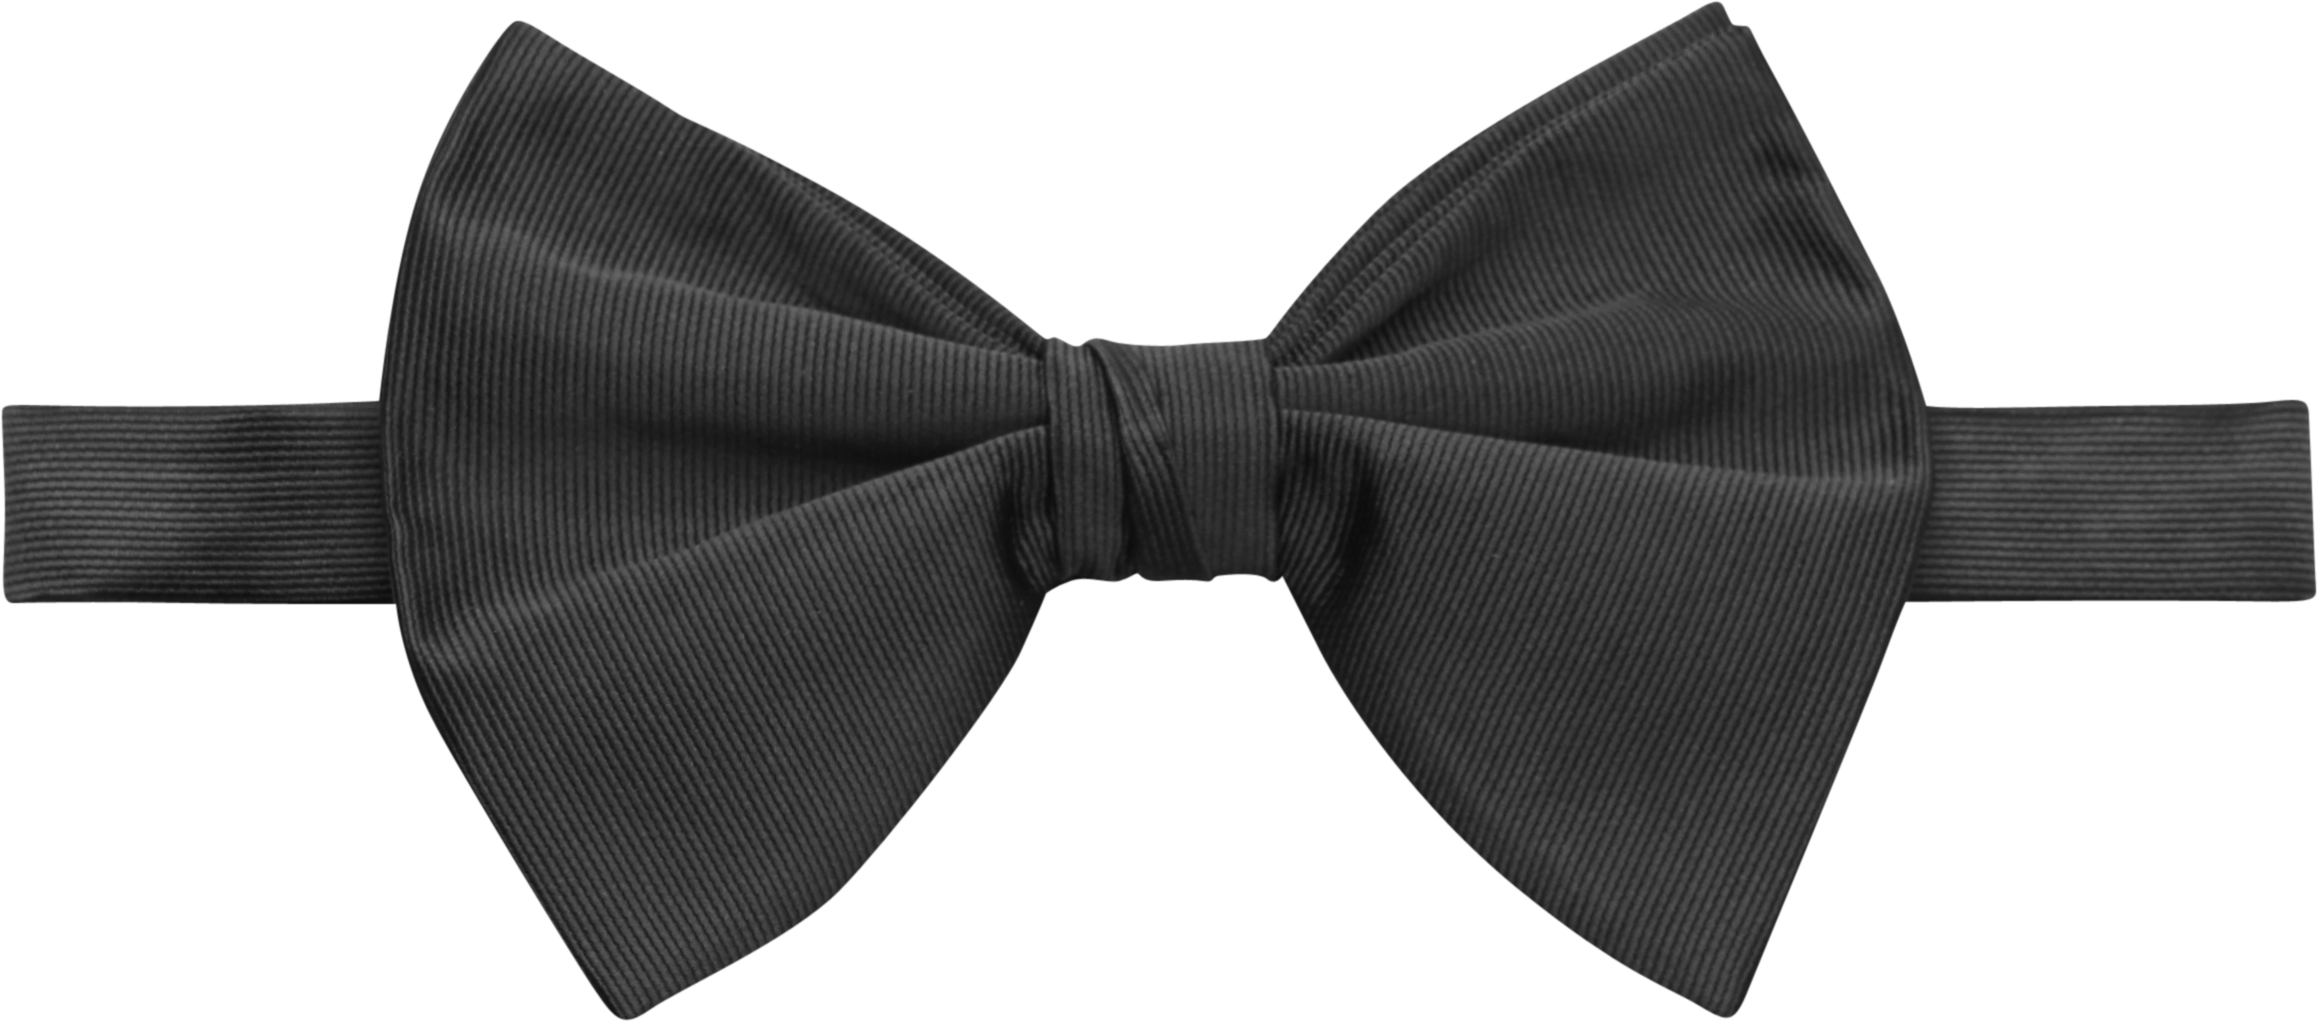 Large Bow Tie